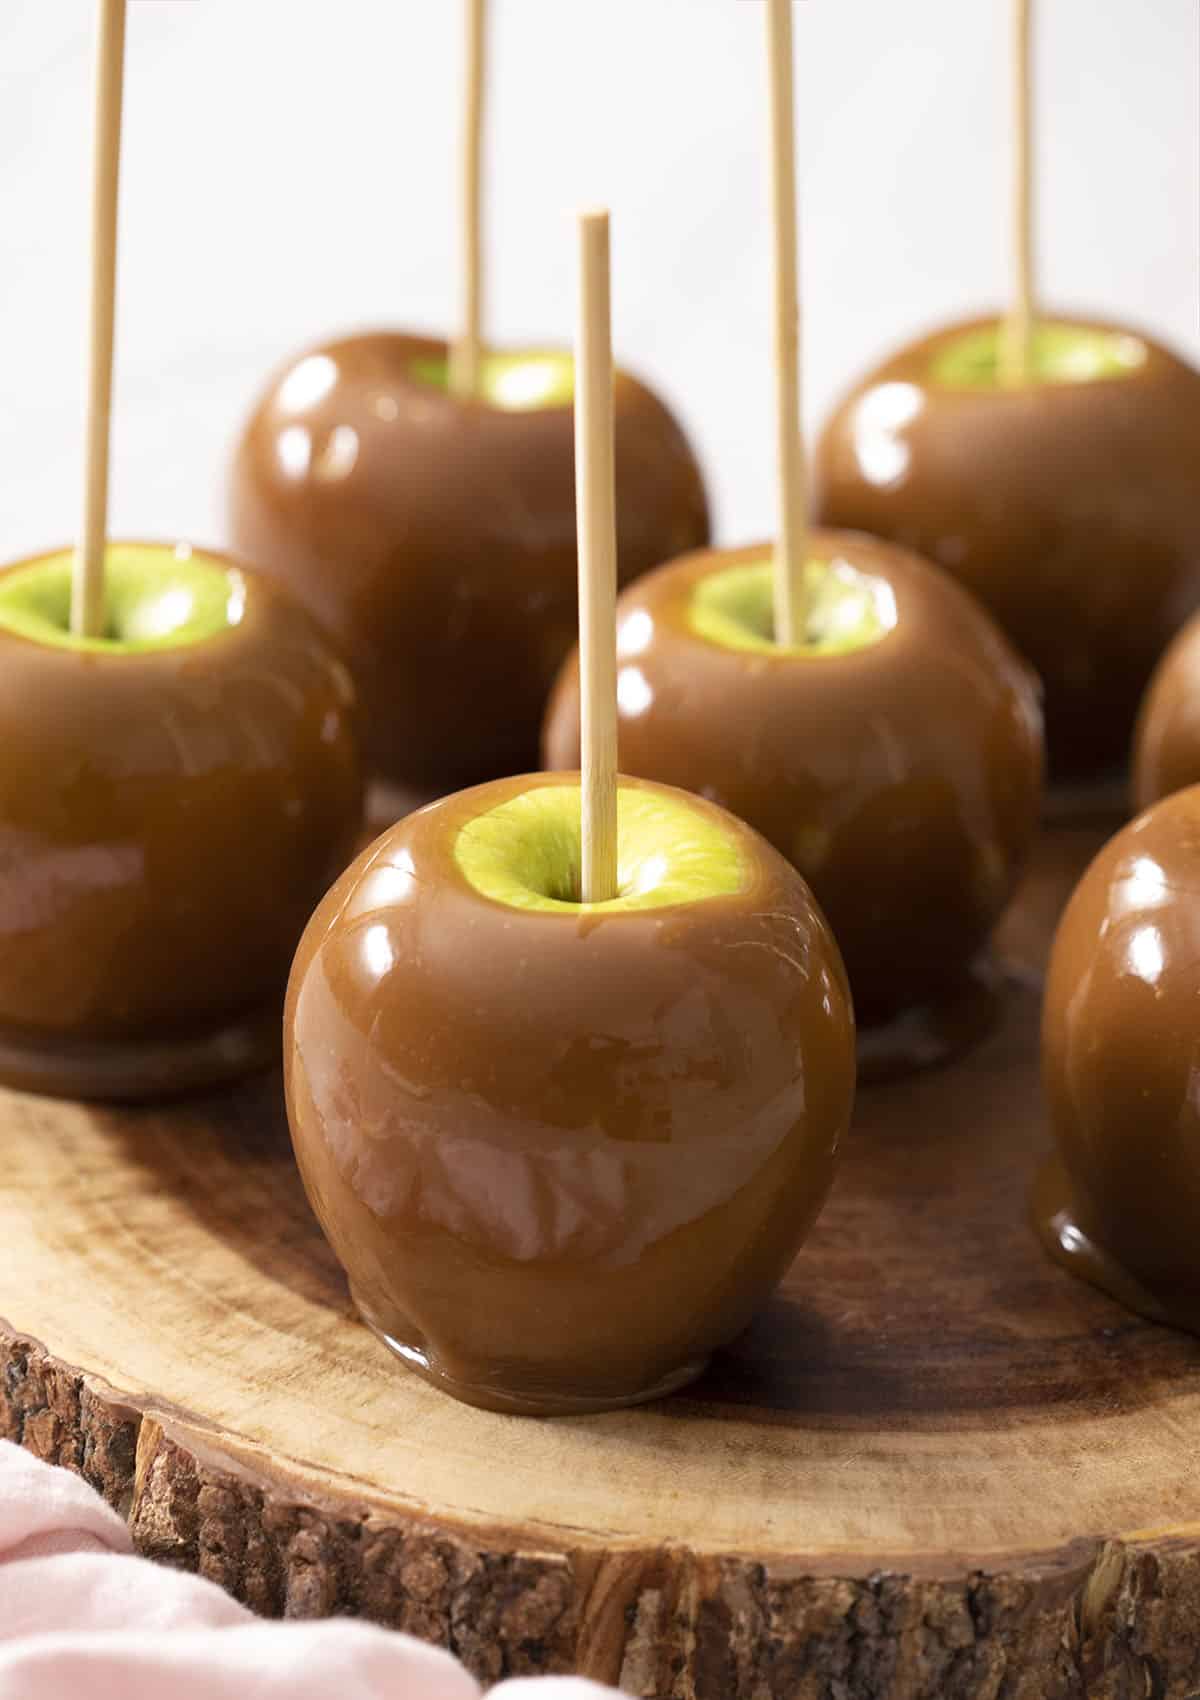 A group of caramel apples on a wooden plate.